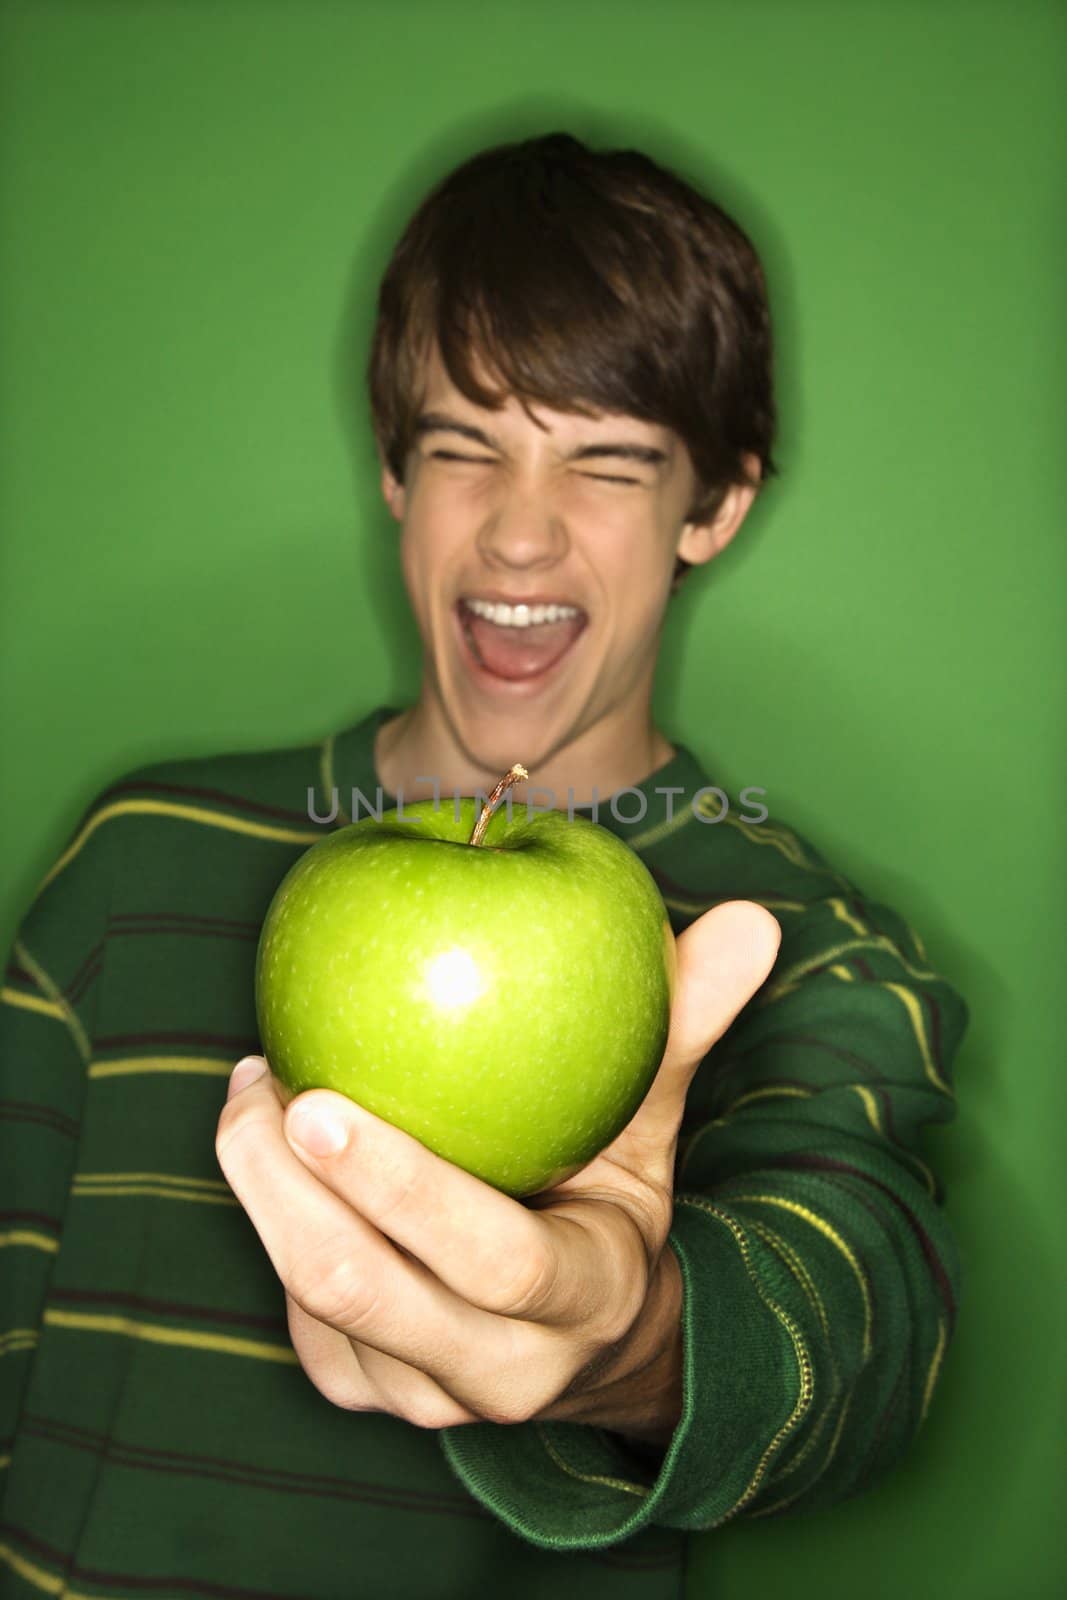 Portrait of Caucasian teen boy holding apple out in hand and making facial expression.